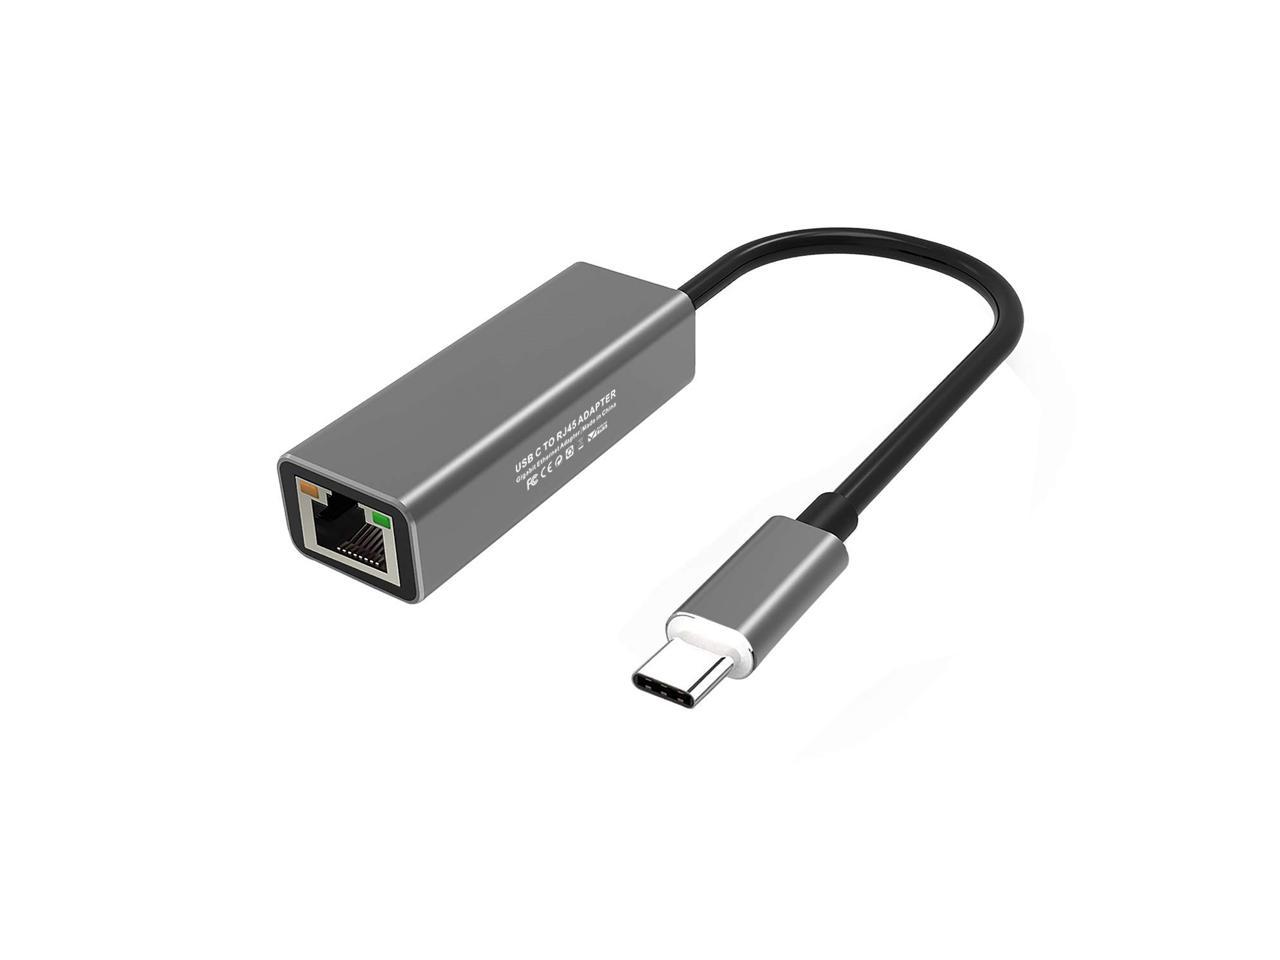 Ethernet Adapter Network Card RJ45 LAN ShineBear Type C to HDMI 4K USB 3.0 USB-C Video Adapter Cable Converter for MacBook Air Pro HDTV Cable Length: Type C 4in1, Color: Silver